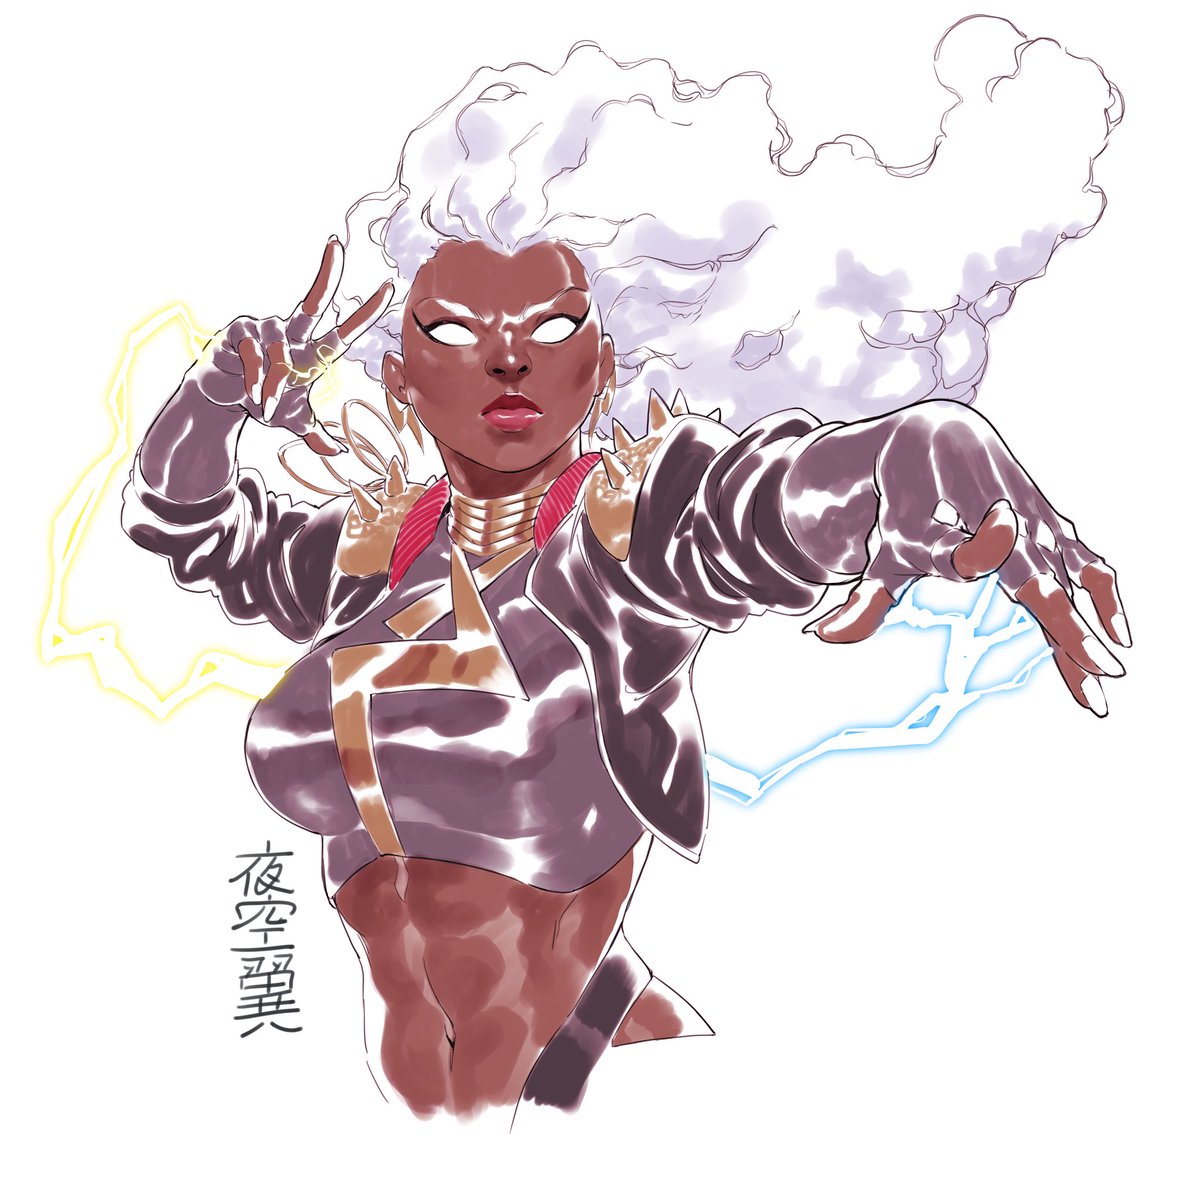 Apparently today is/was #nationalsuperheroday— i gotta fill in my quota or l lose my card, so here is my latest SH drawing: #Storm— #xmen #XMen97